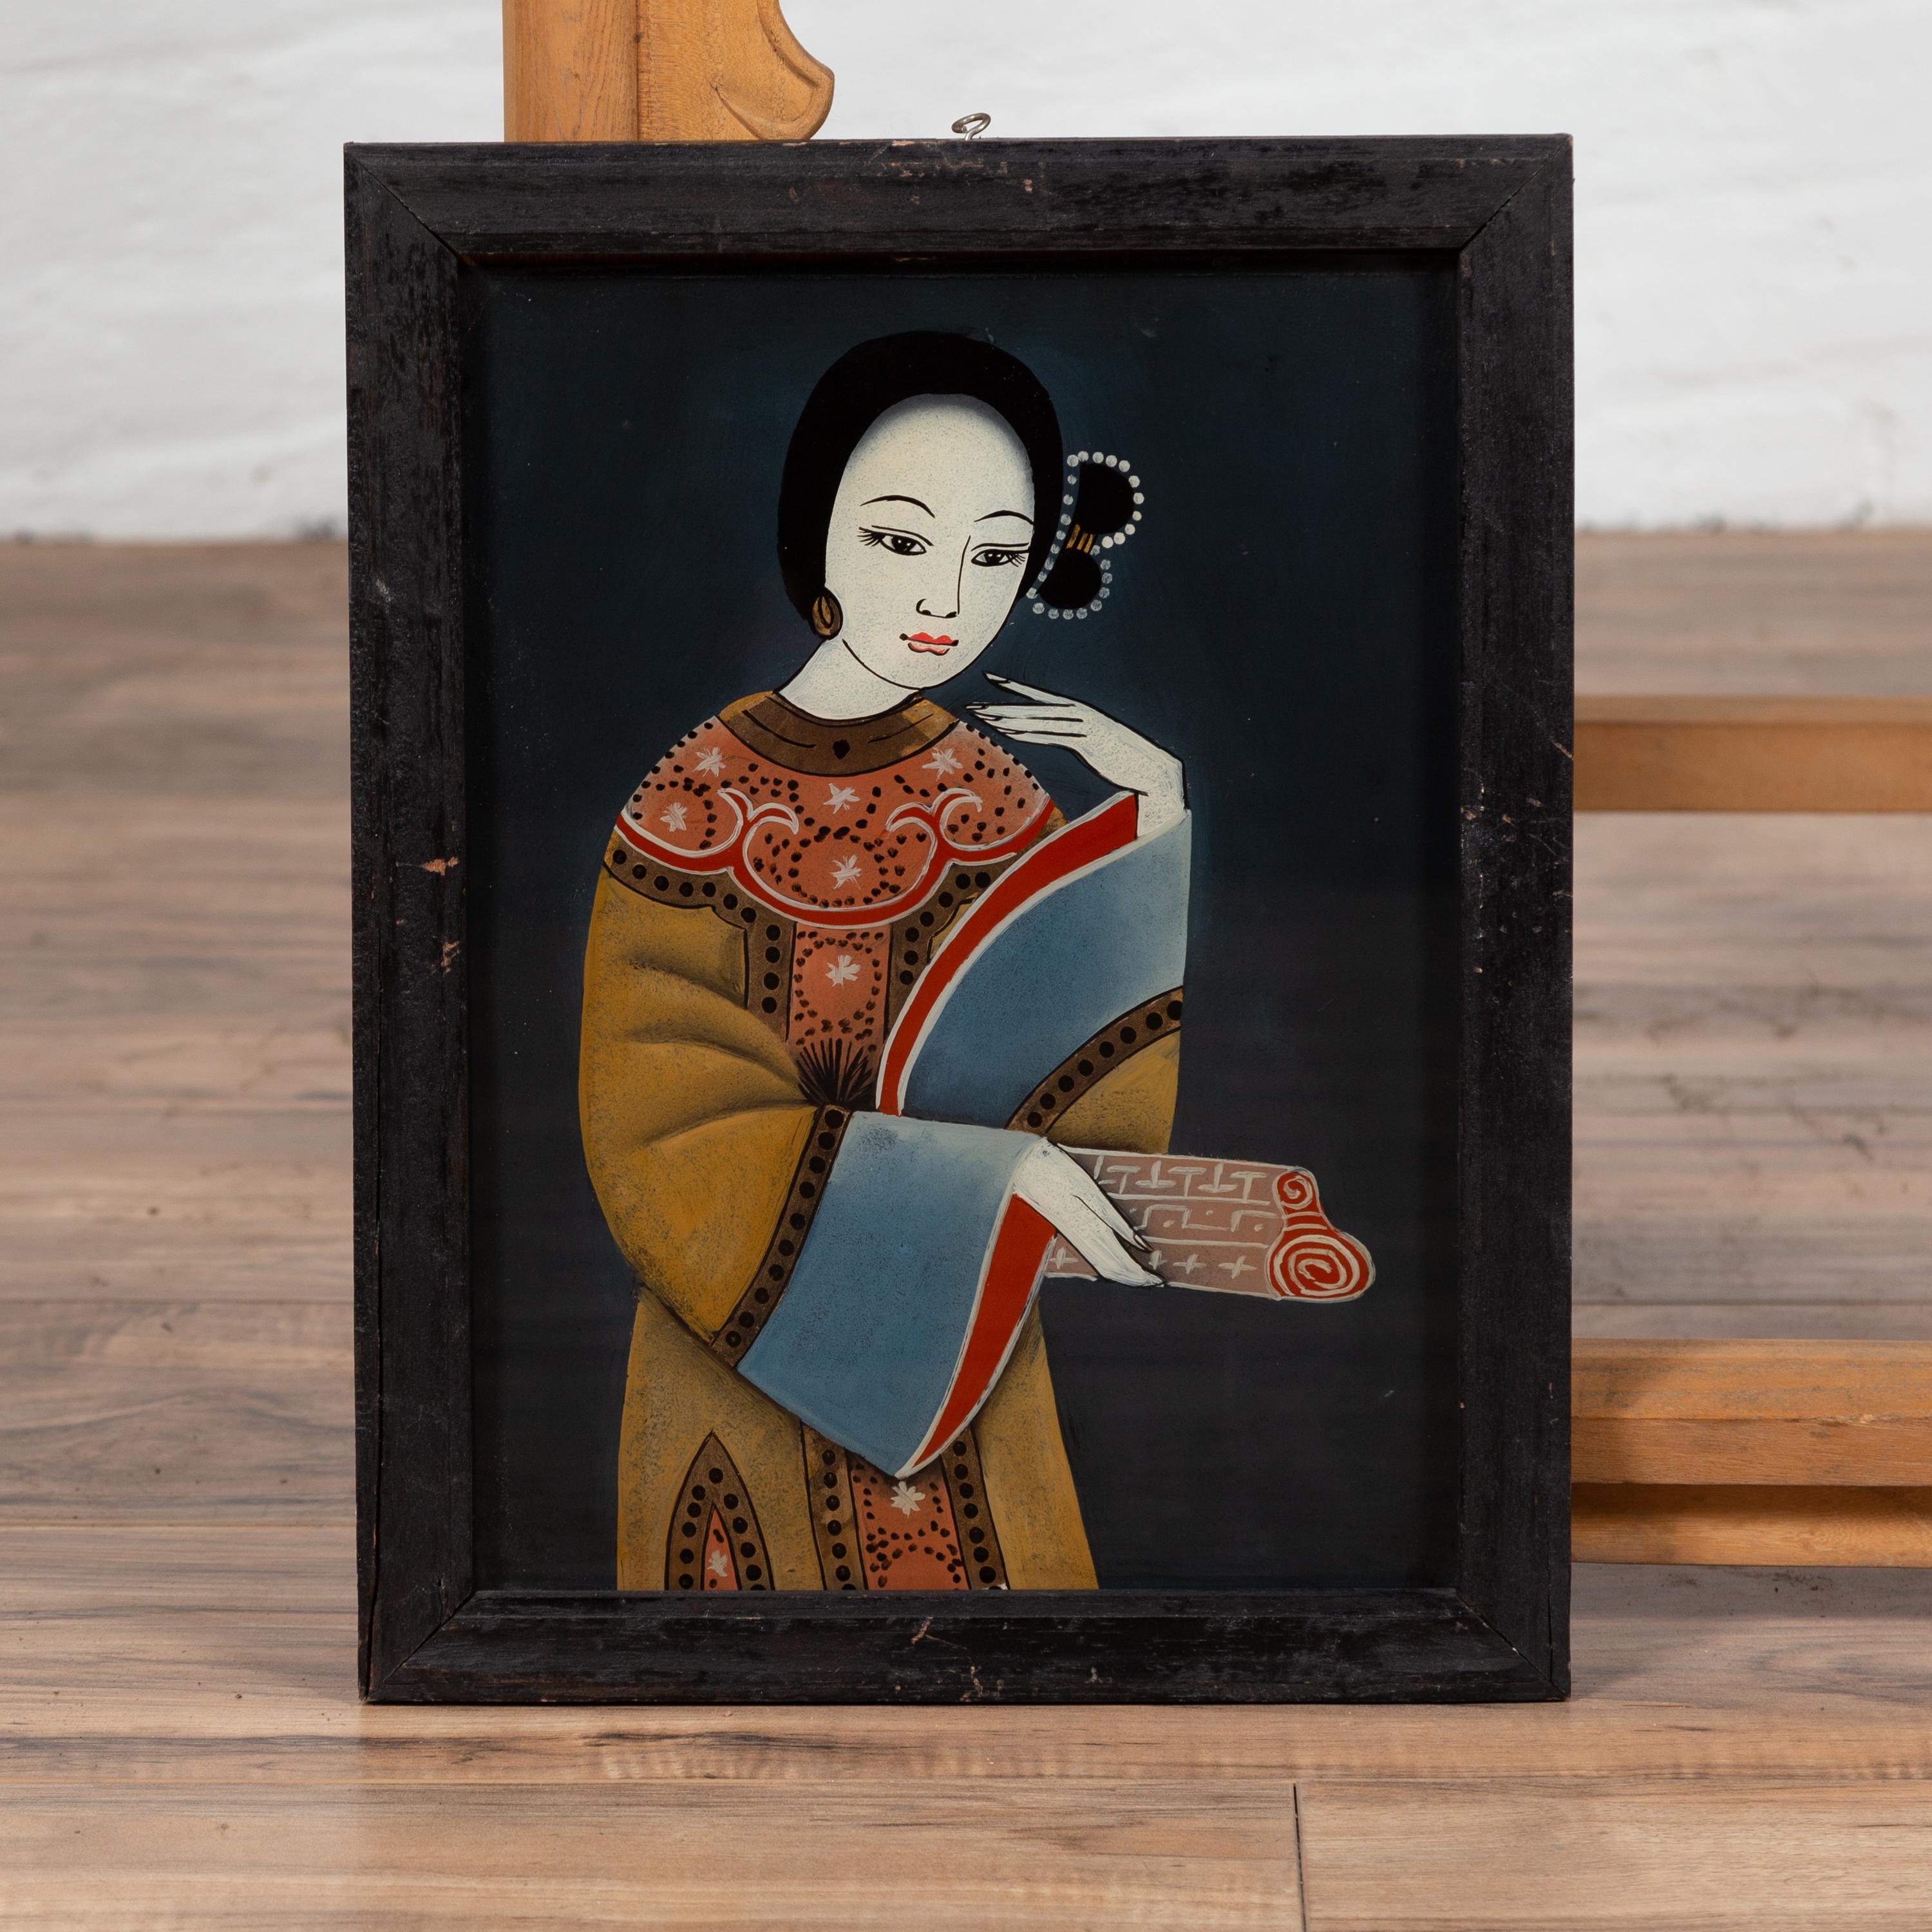 Hand-Painted Antique Japanese Painting on Glass Depicting a Woman, Set in a Black Frame